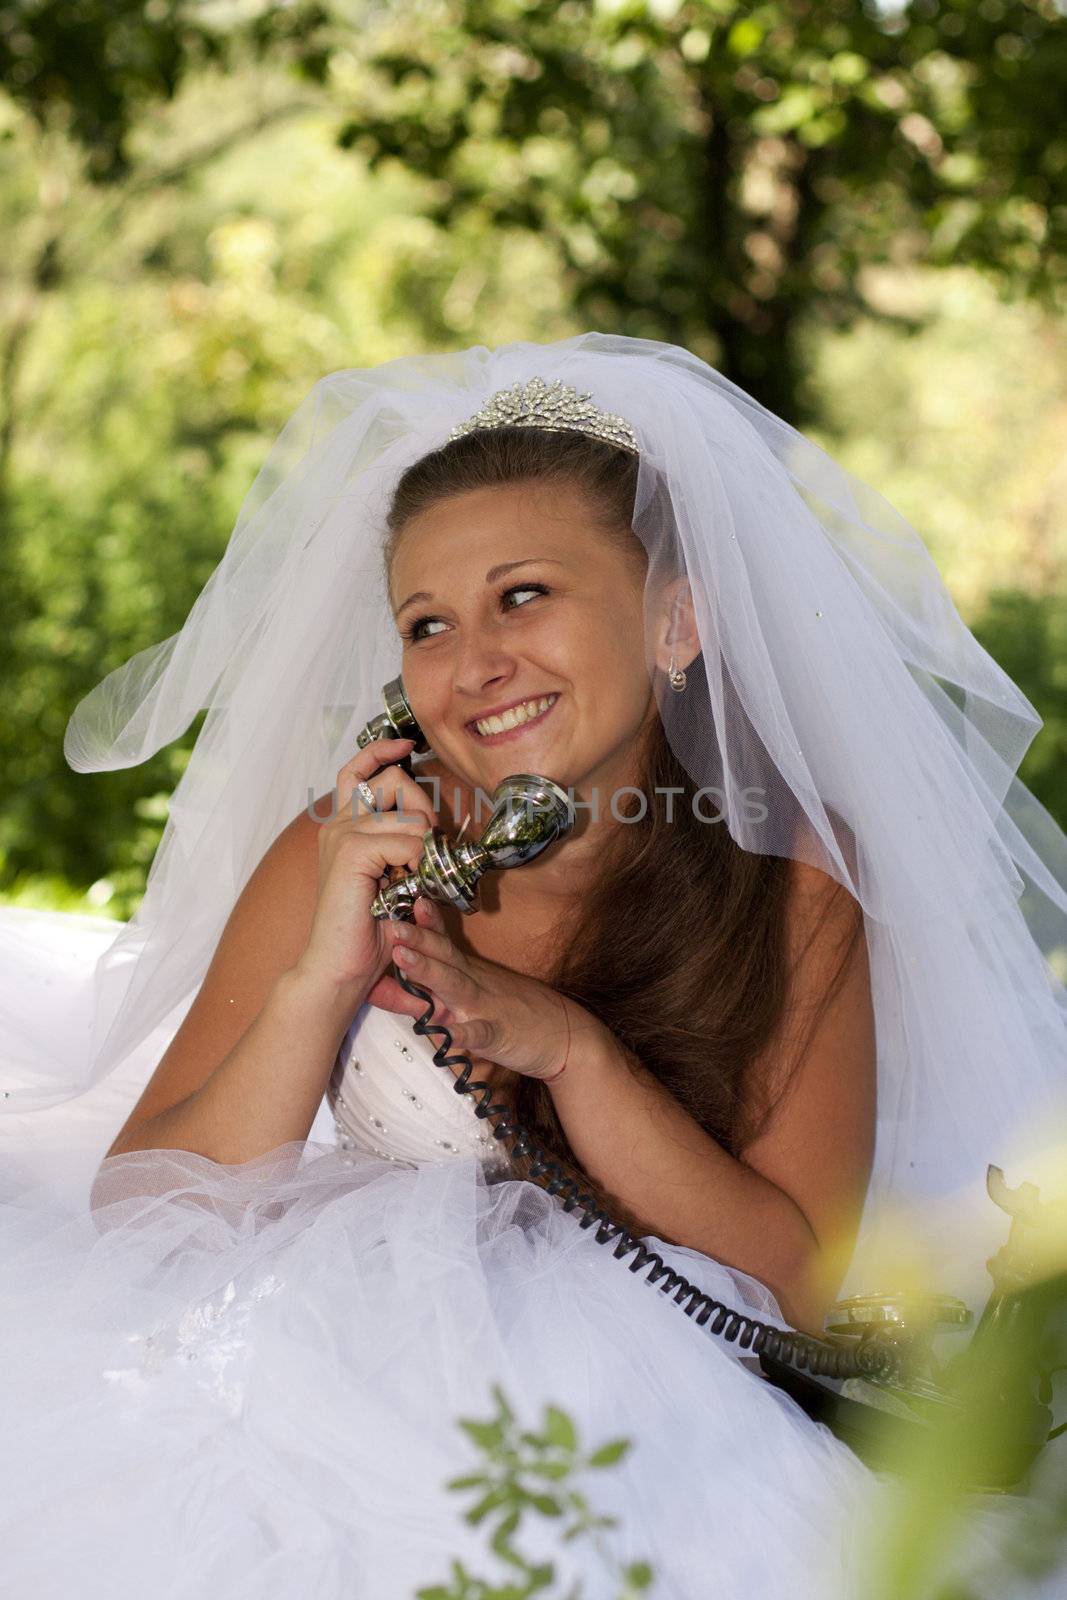 The bride with telephone by zokov